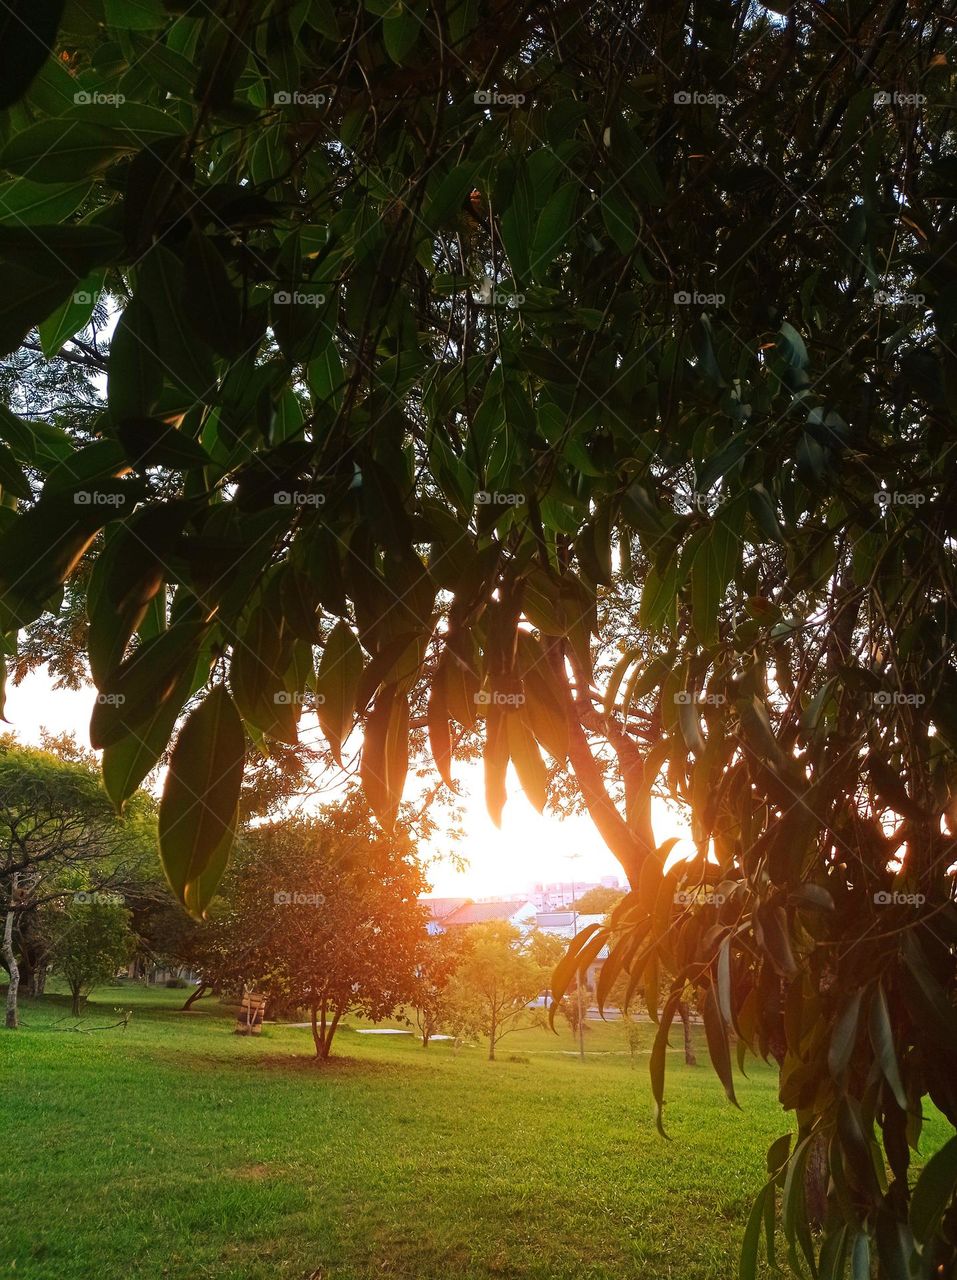 sunset in our park